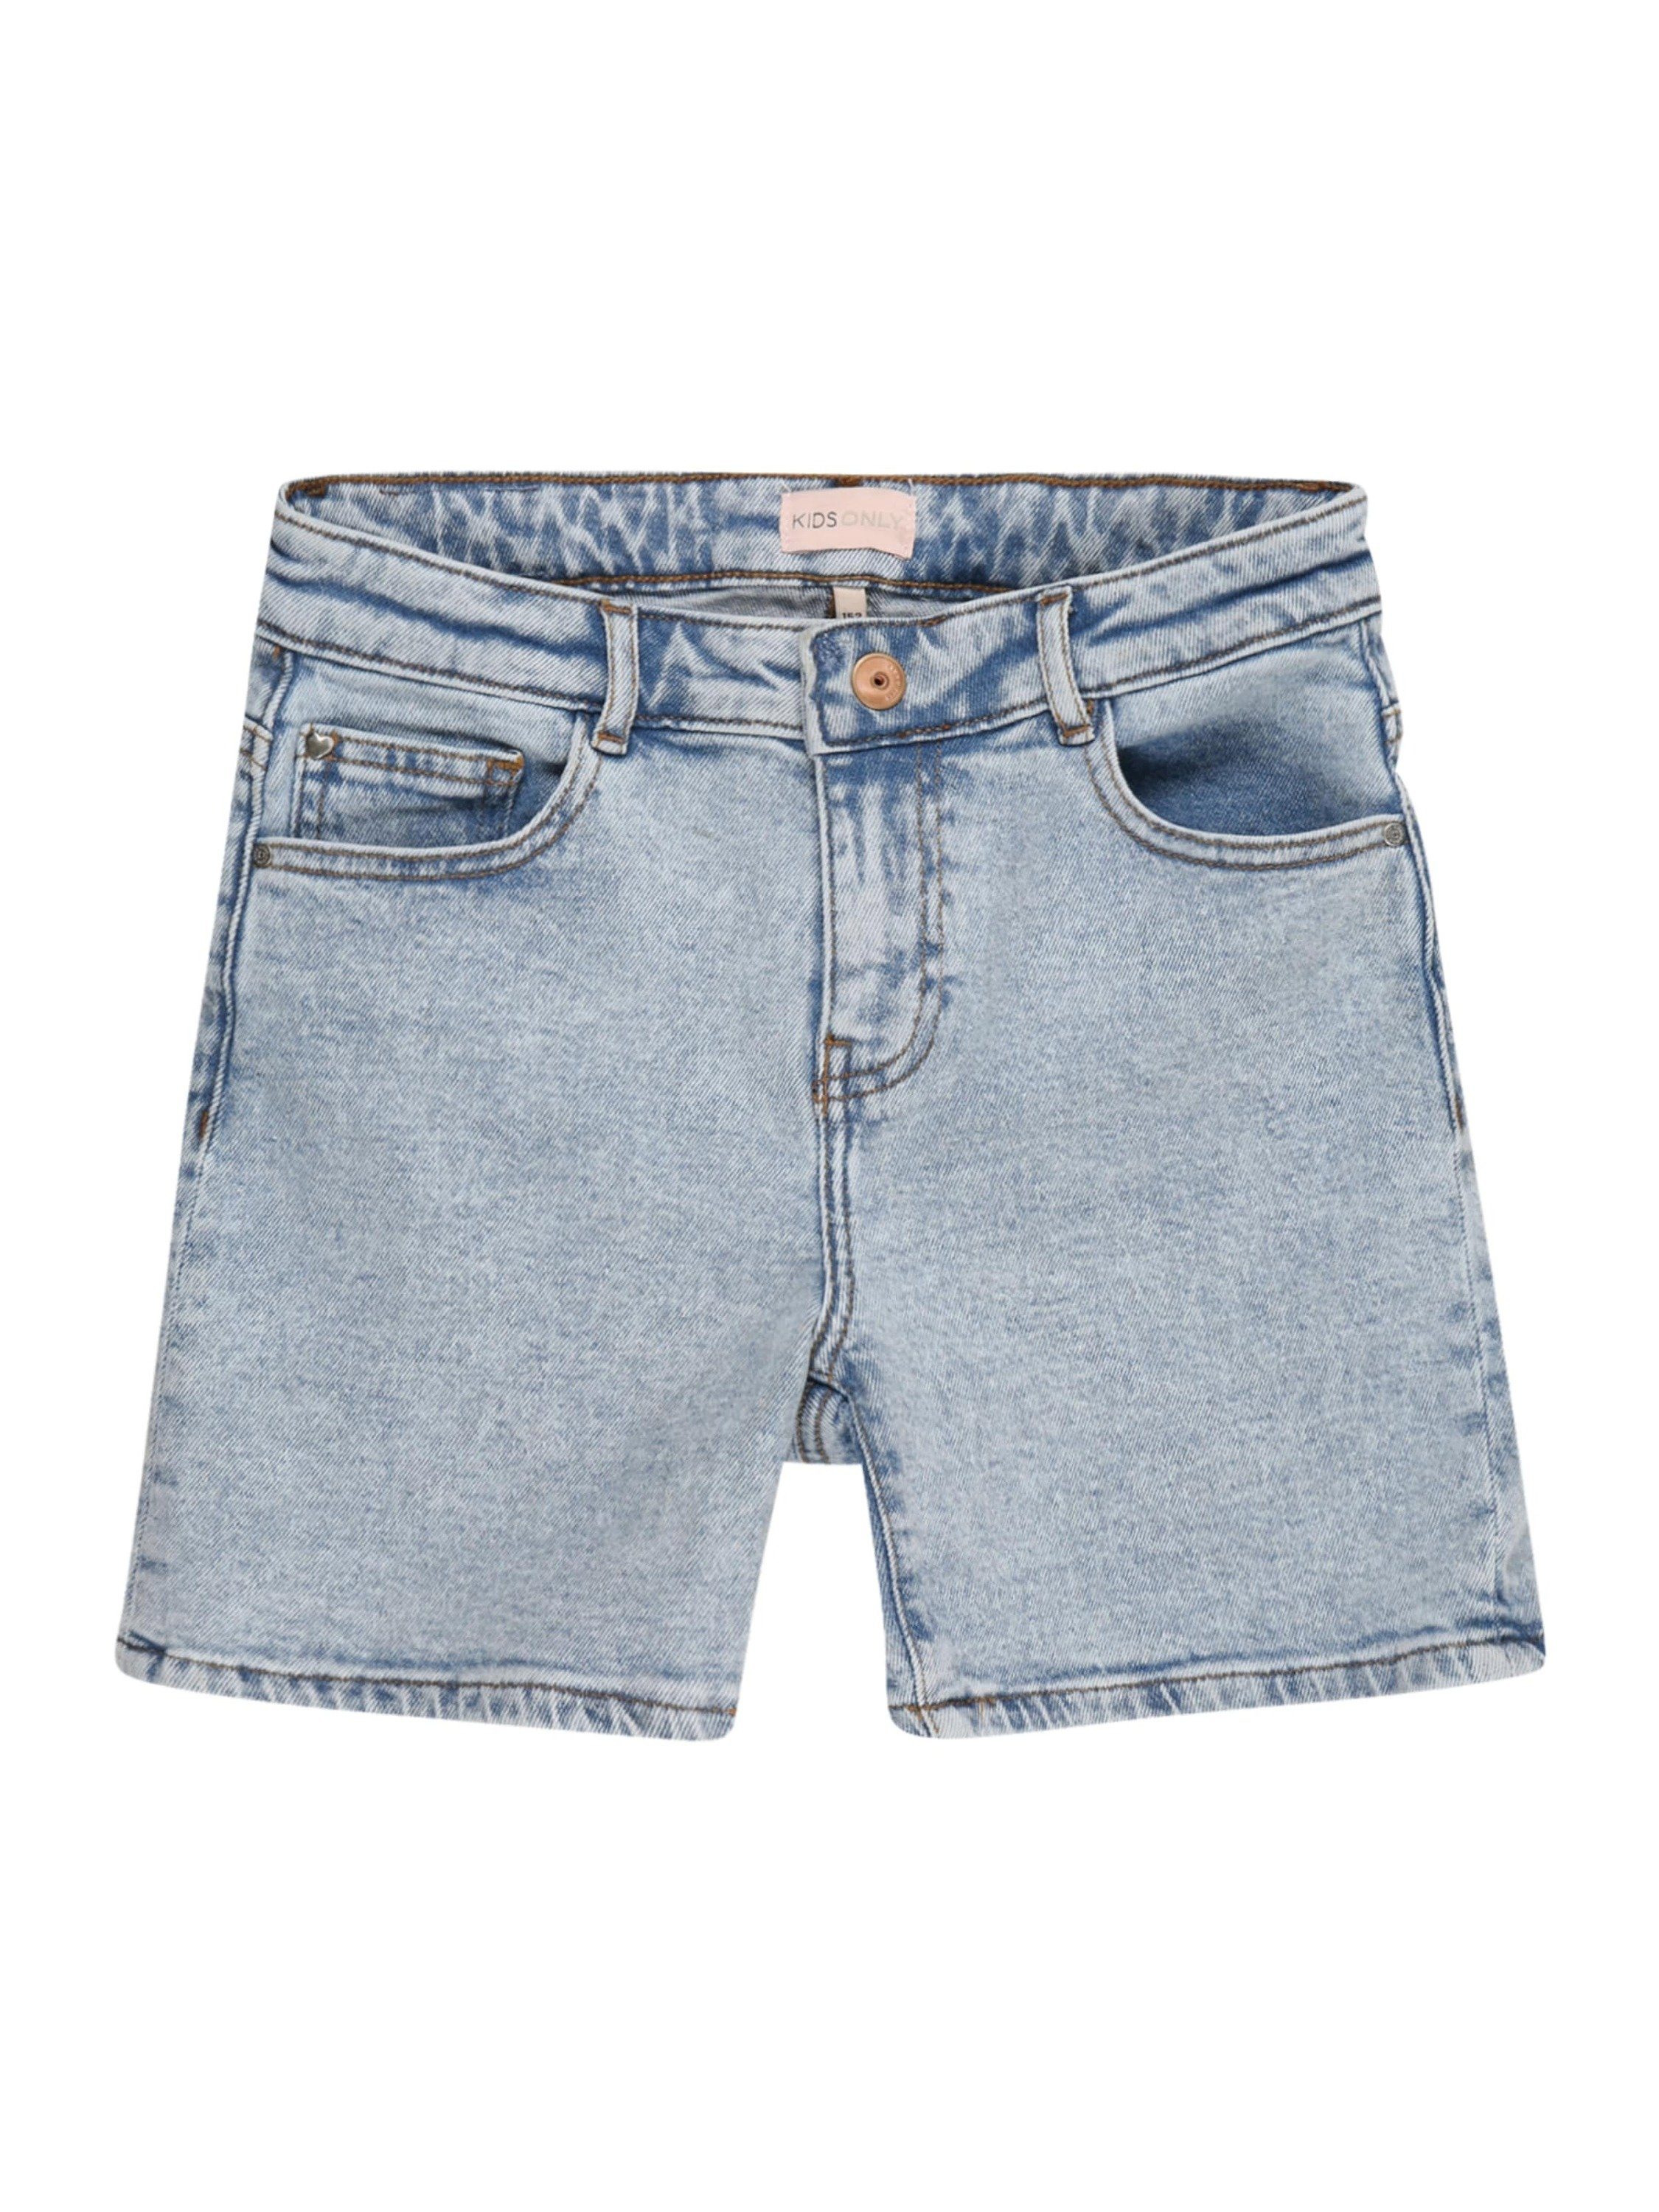 KONPHINE, Flag Jeansshorts KIDS Label ONLY Patch/Label